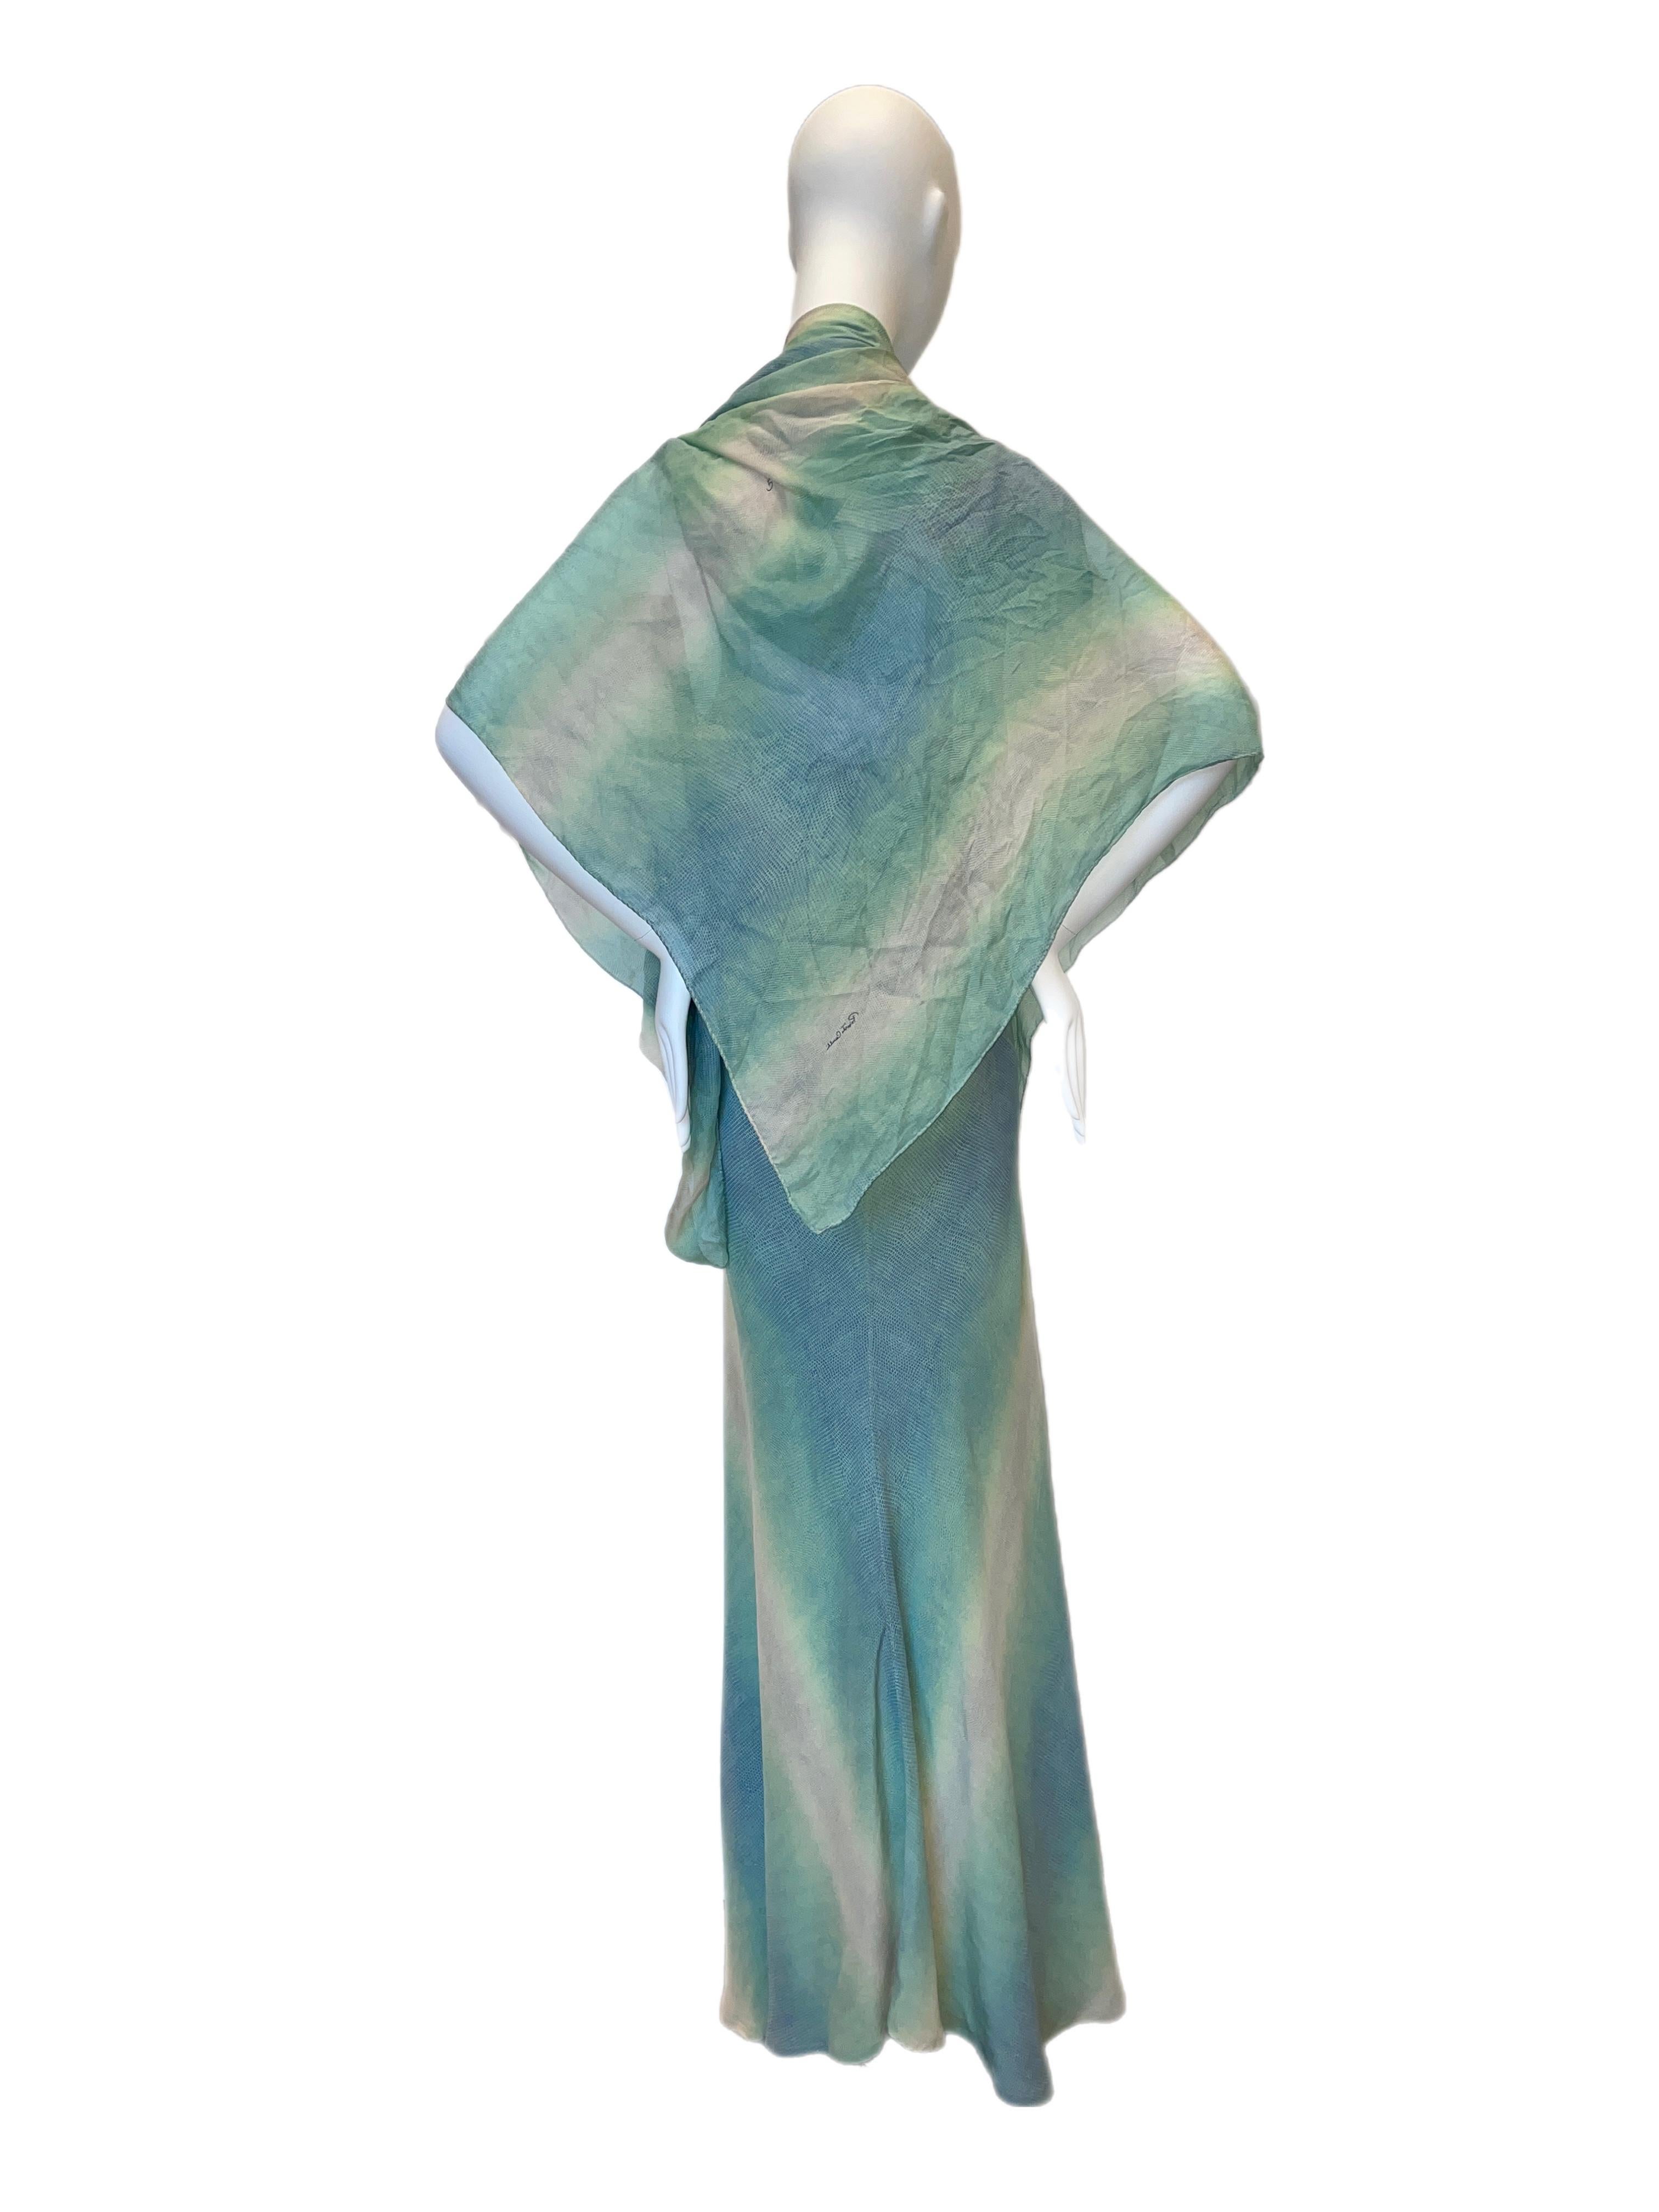 FINAL SALE. NO REFUNDS NOR RETURNS

SS02 vintage Roberto Cavalli silk maxi dress with matching shawl. Amazing reptile print in blue and green hues. Size L fits true to size. Worn by Pamela Anderson in tan.

Excellent condition, one small spot on the